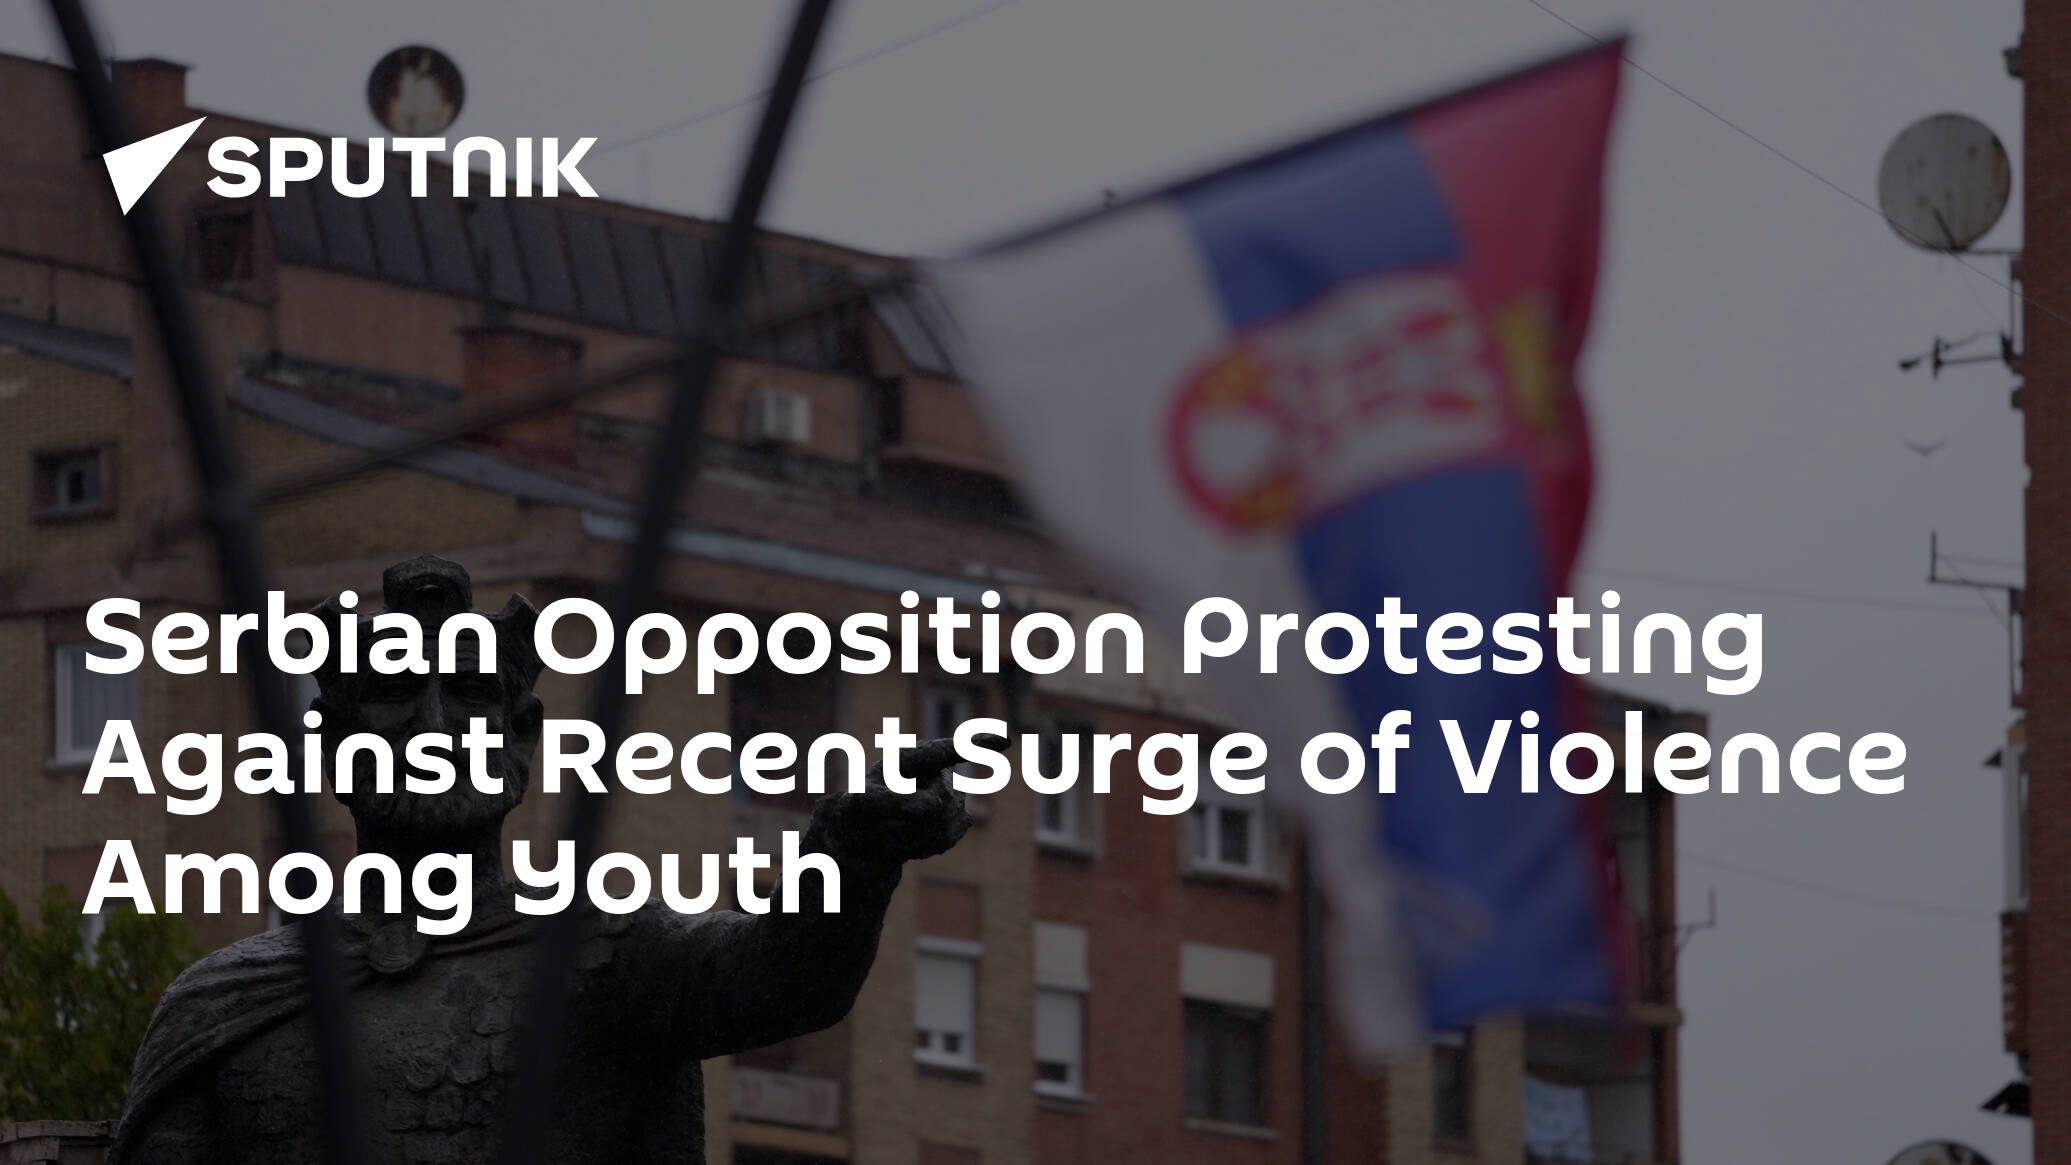 Serbian Opposition Protesting Against Recent Surge of Violence Among Youth